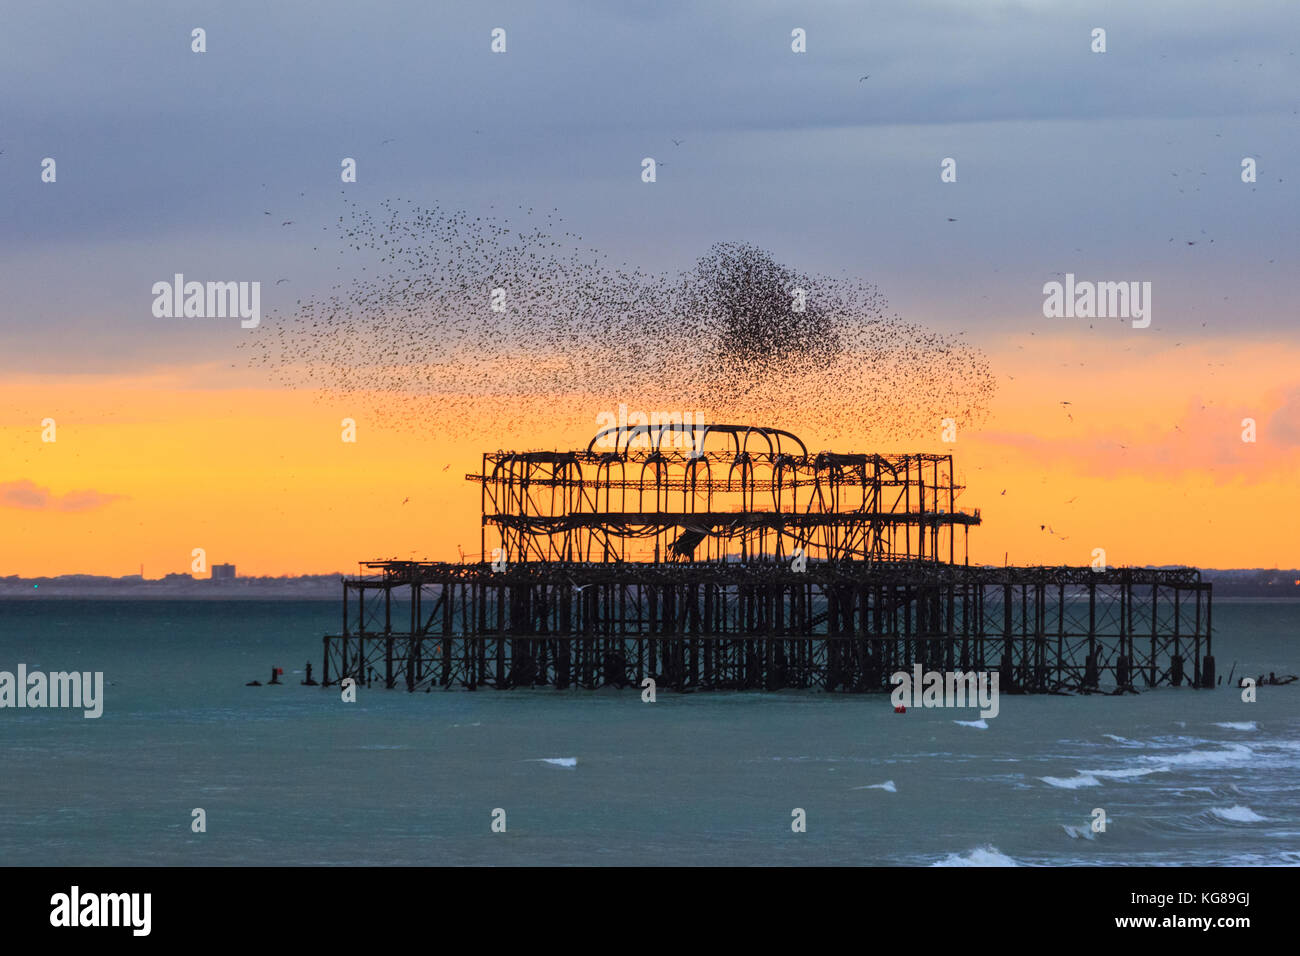 Brighton, UK, 4th November 2017. A flock of thousands of starlings forms murmurations above the sea and derelict West Pier in Brighton, East Sussex. UK starlings flock in large numbers every autumn as the days get colder, before forming large communal roosts during the cold winter months. Credit: Imageplotter News and Sports/Alamy Live News Stock Photo